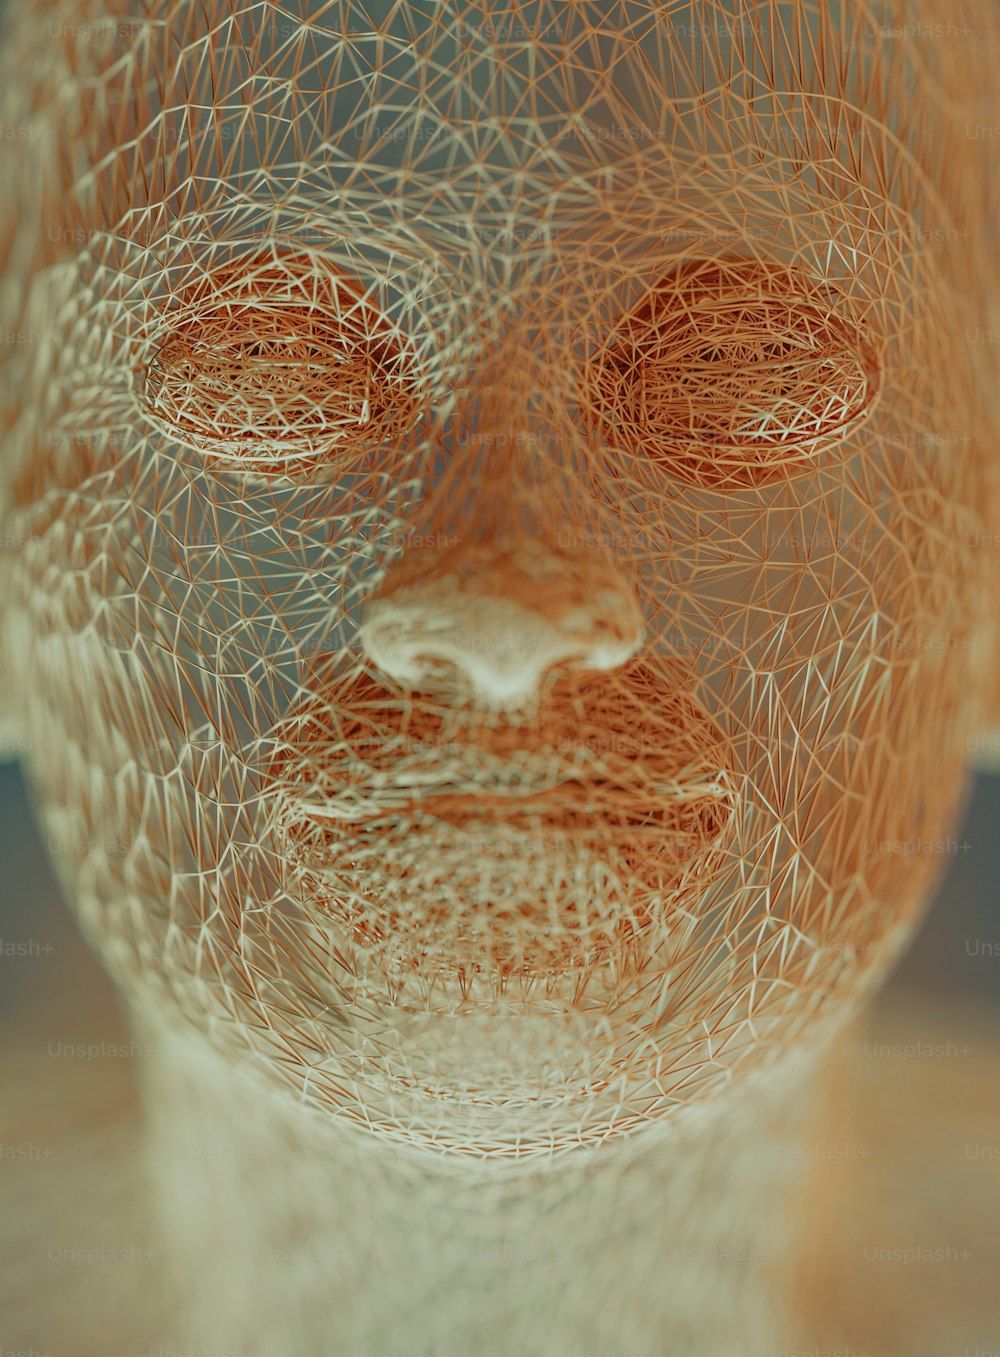 a wire sculpture of a man's face with eyes closed